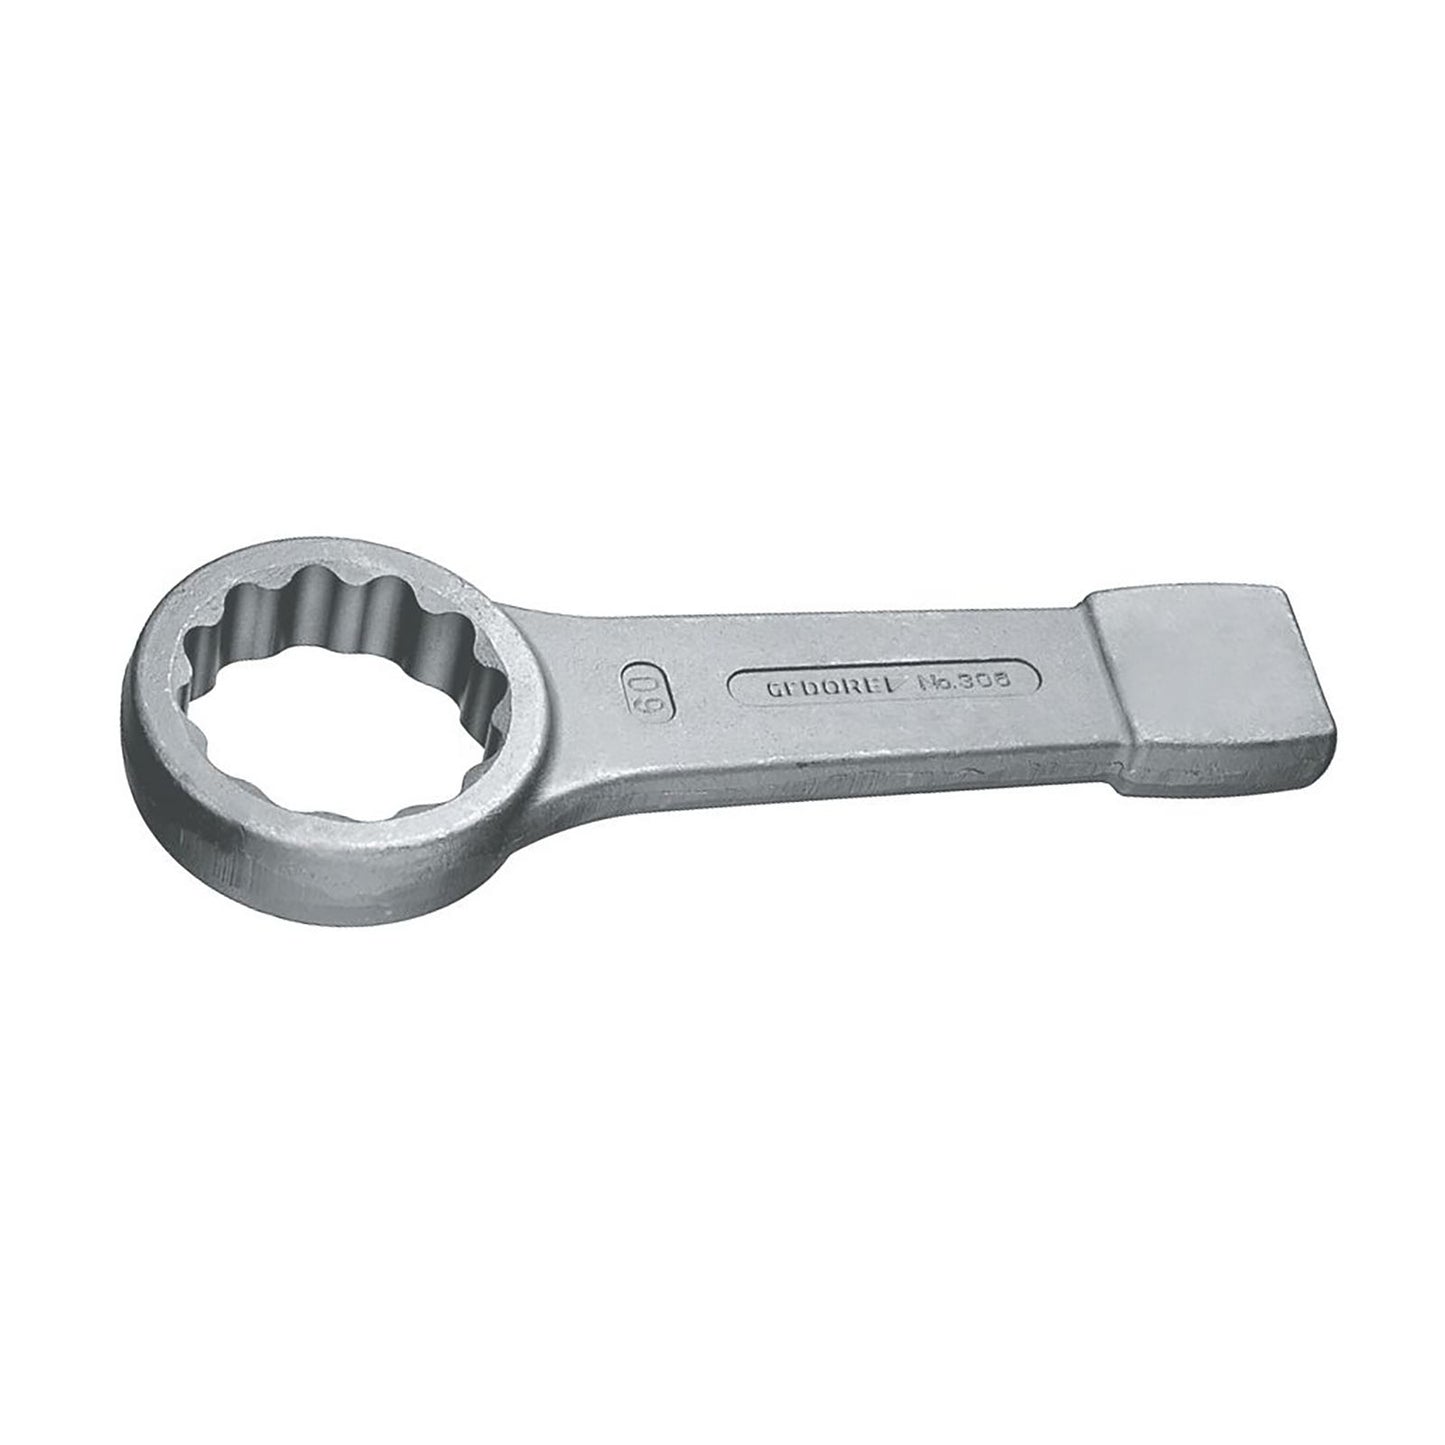 GEDORE 306 36 - Closed Strike Wrench, 36mm (6475430)